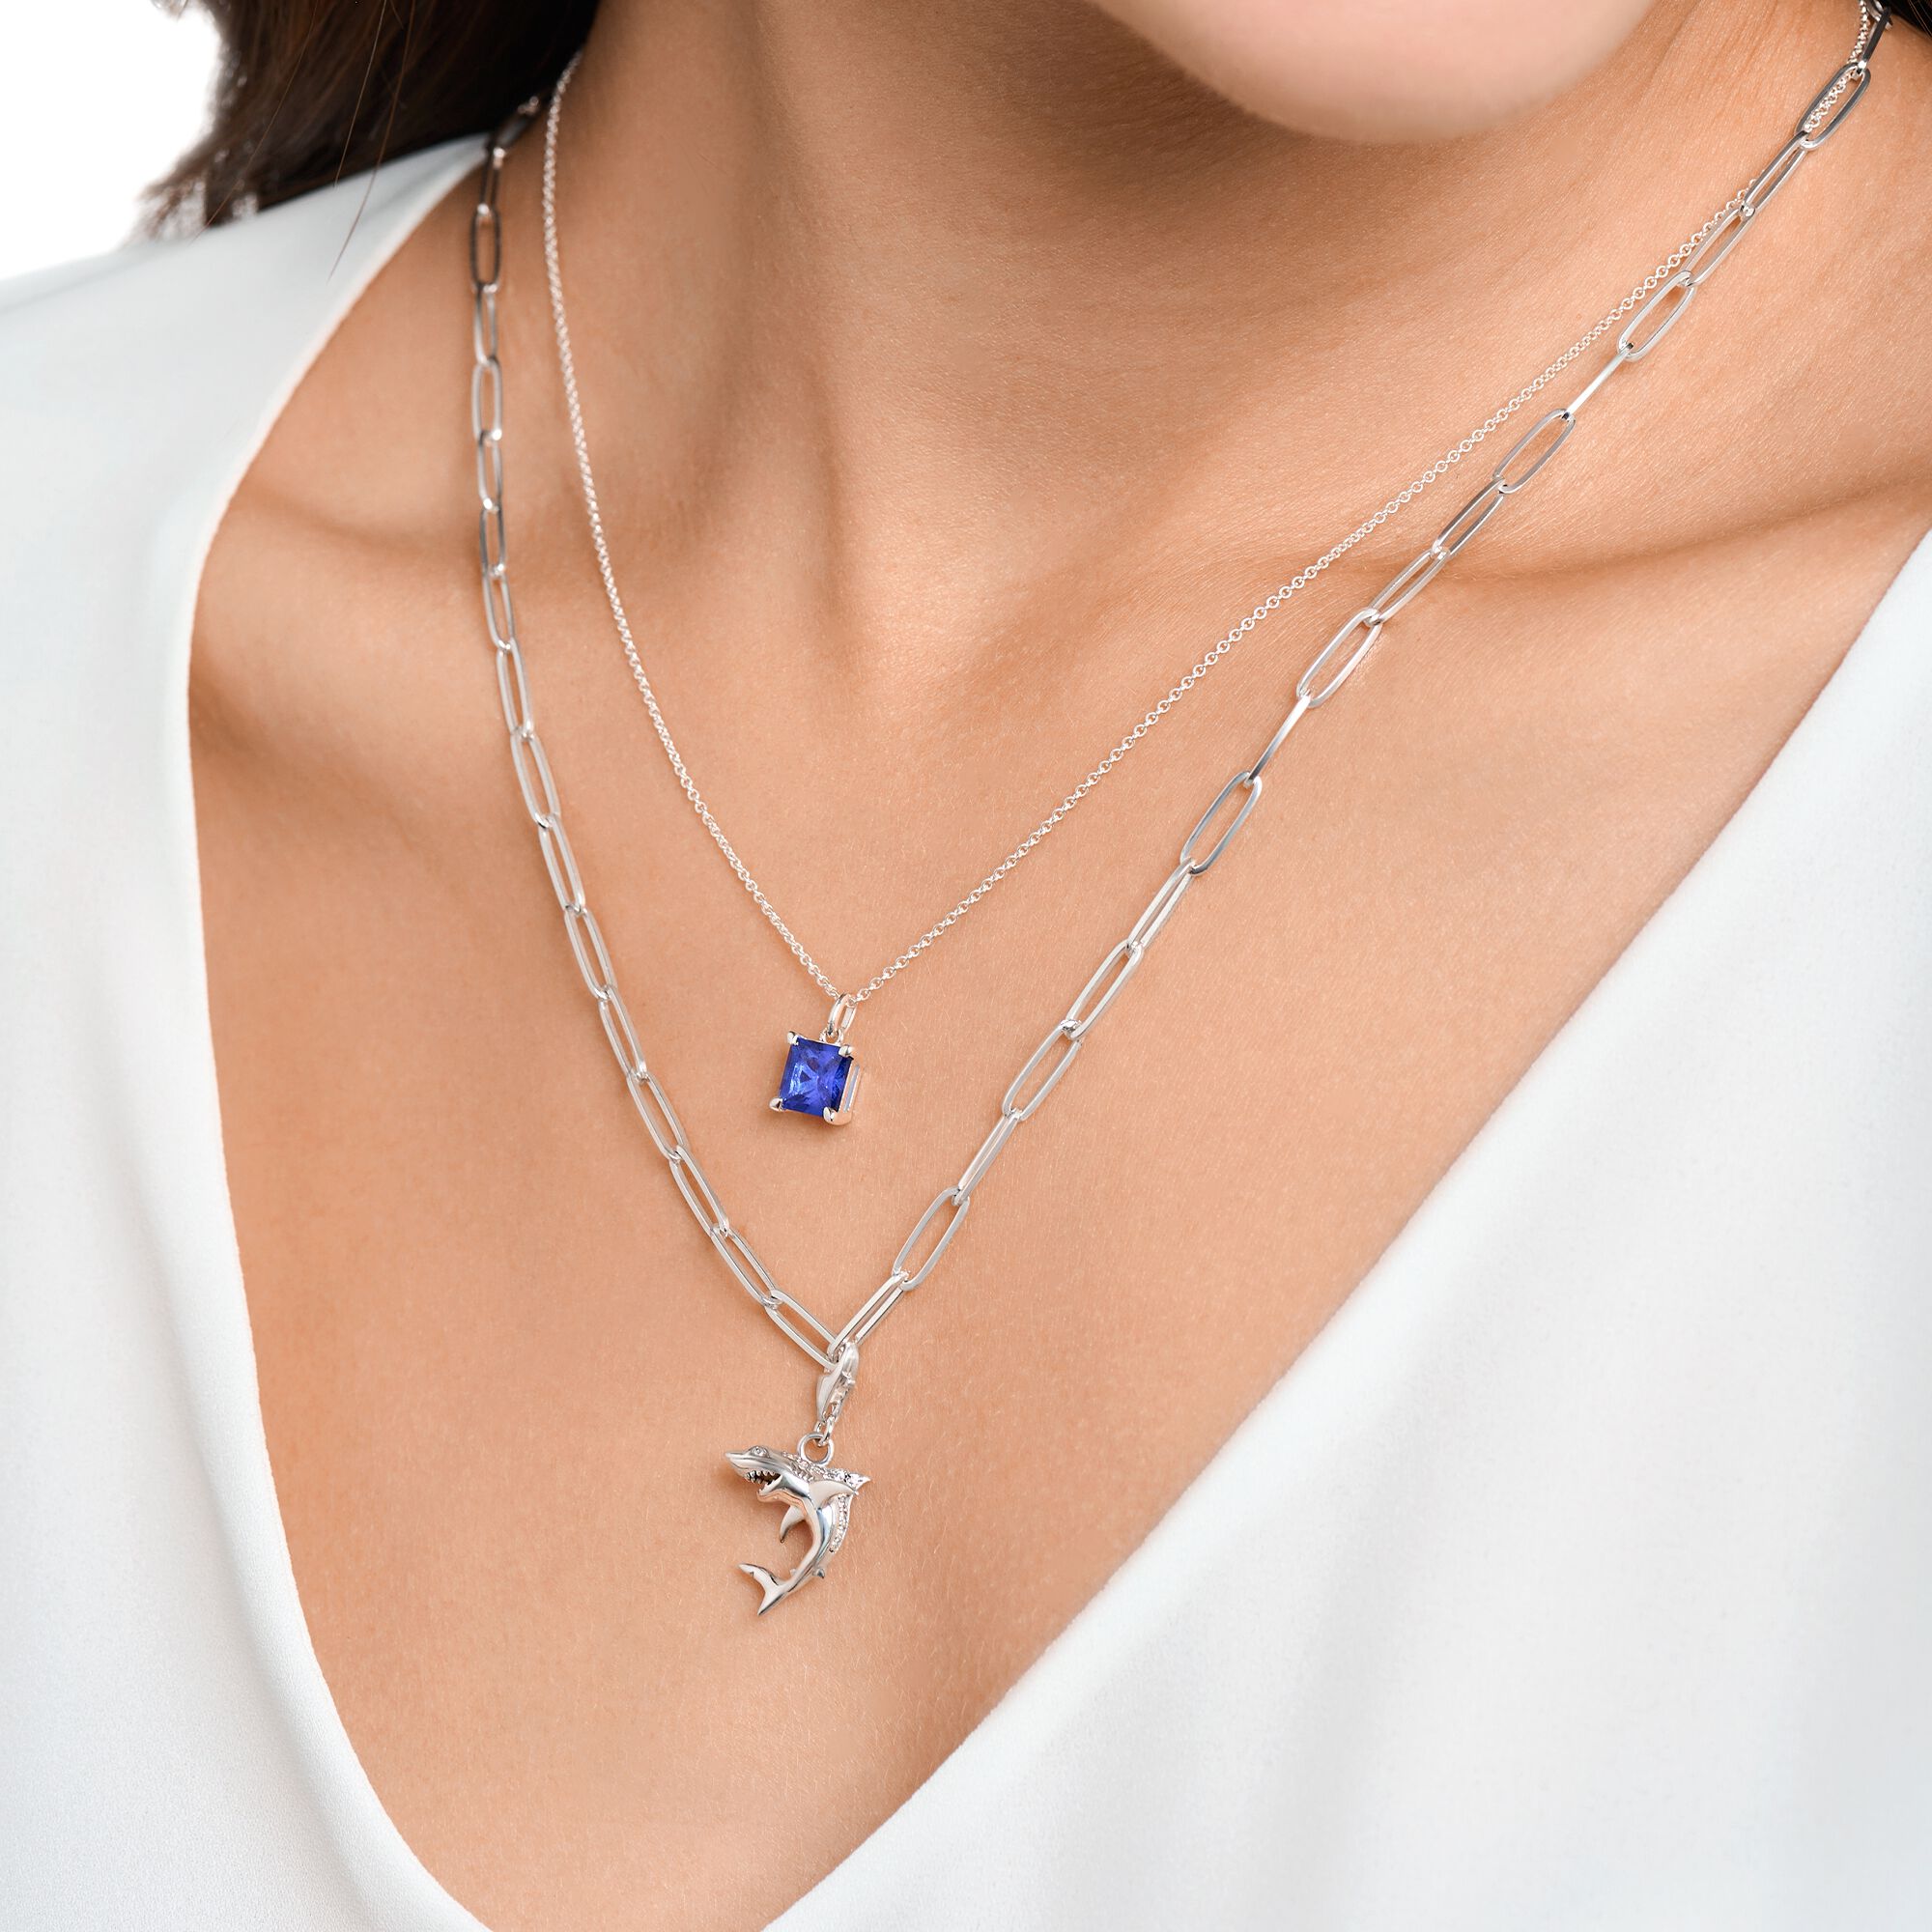 Necklace with pendant: Silver & sapphire-blue stone – THOMAS SABO